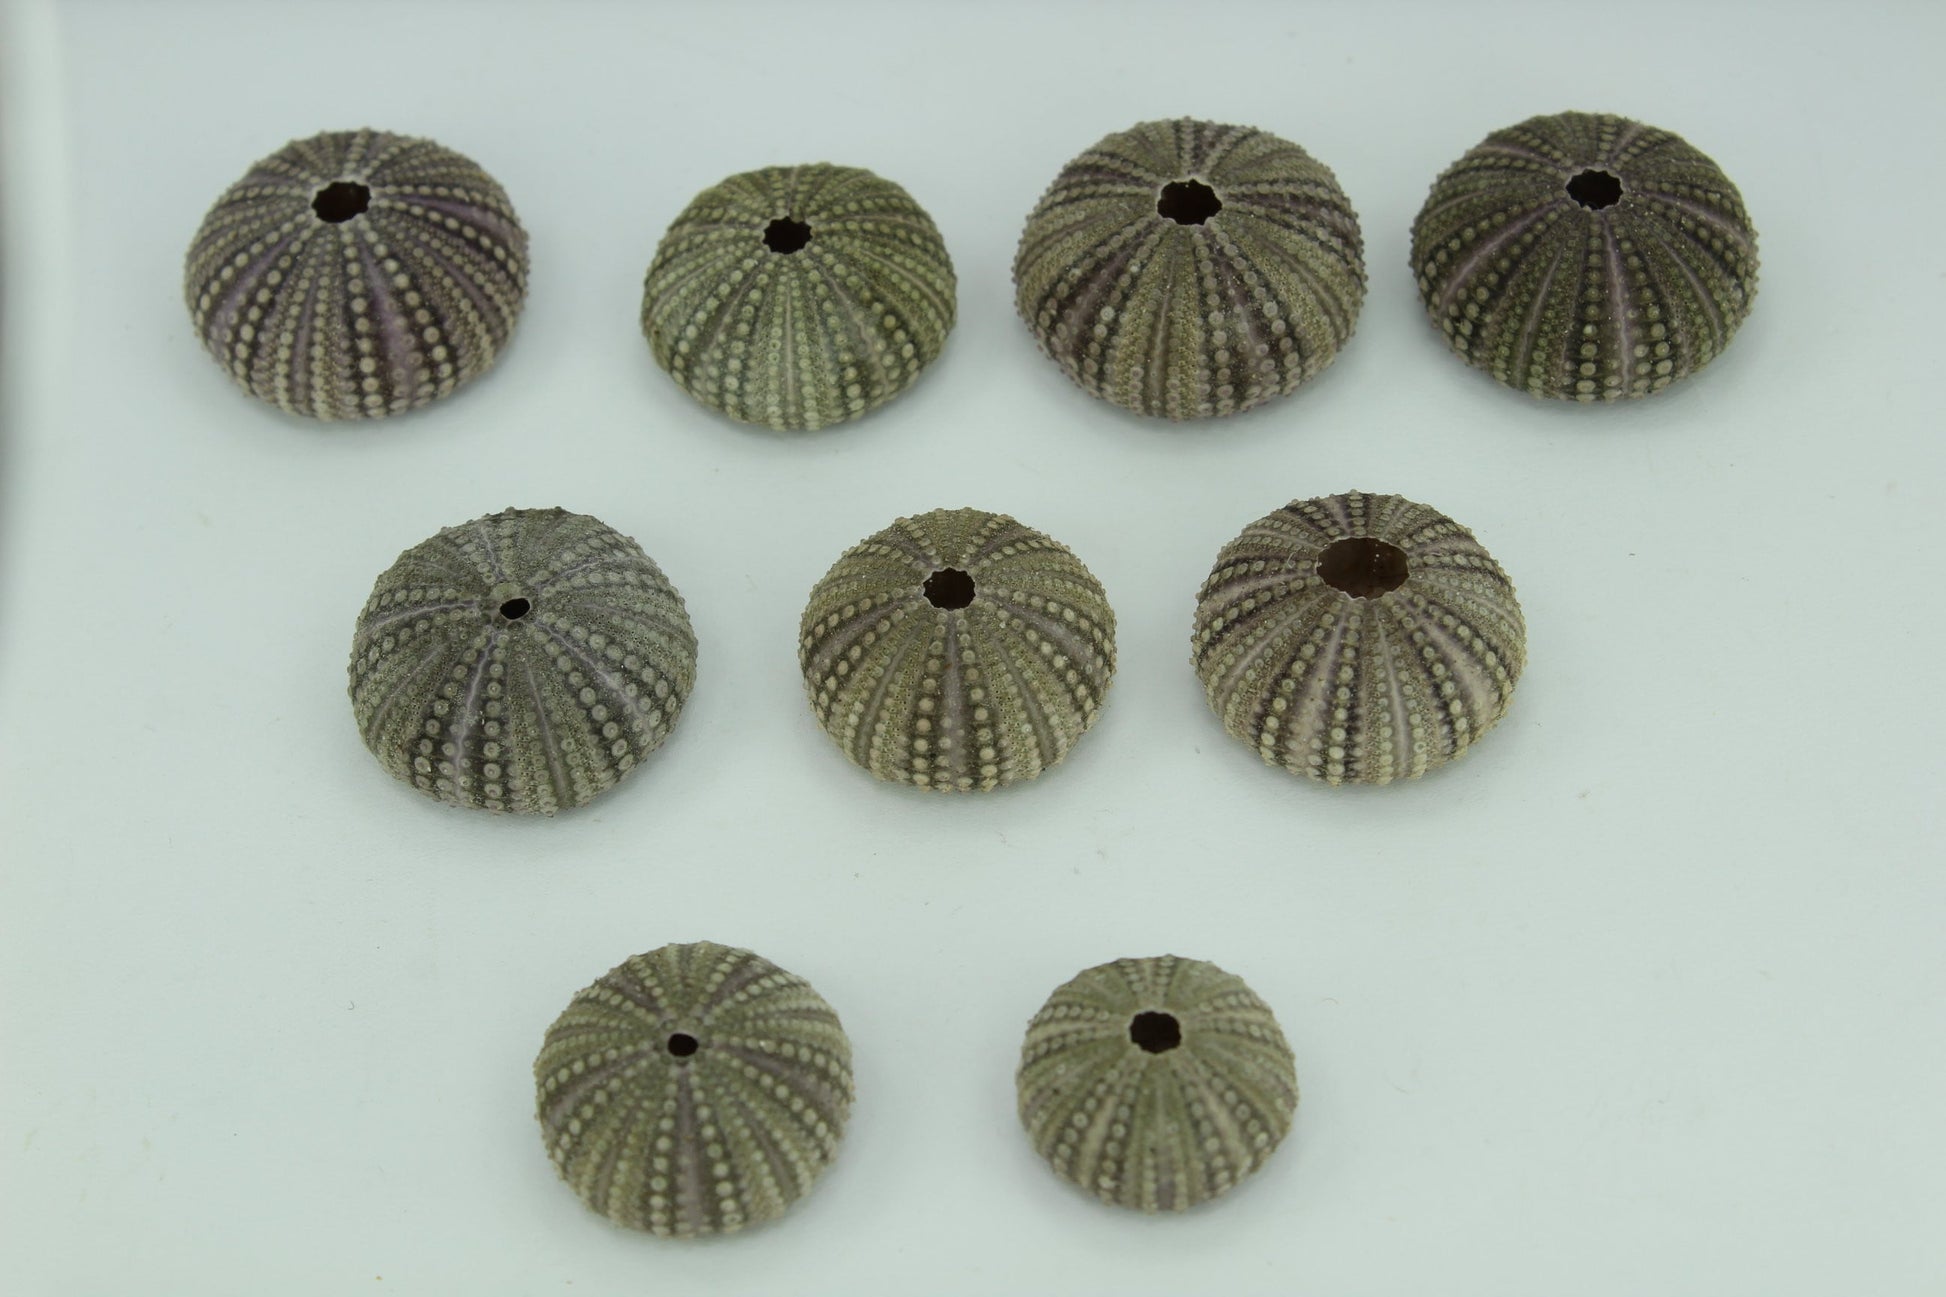 Florida Natural Baby Sea Urchins Estate Collection 1960s 70s Jewelry Shell Art Collectibles